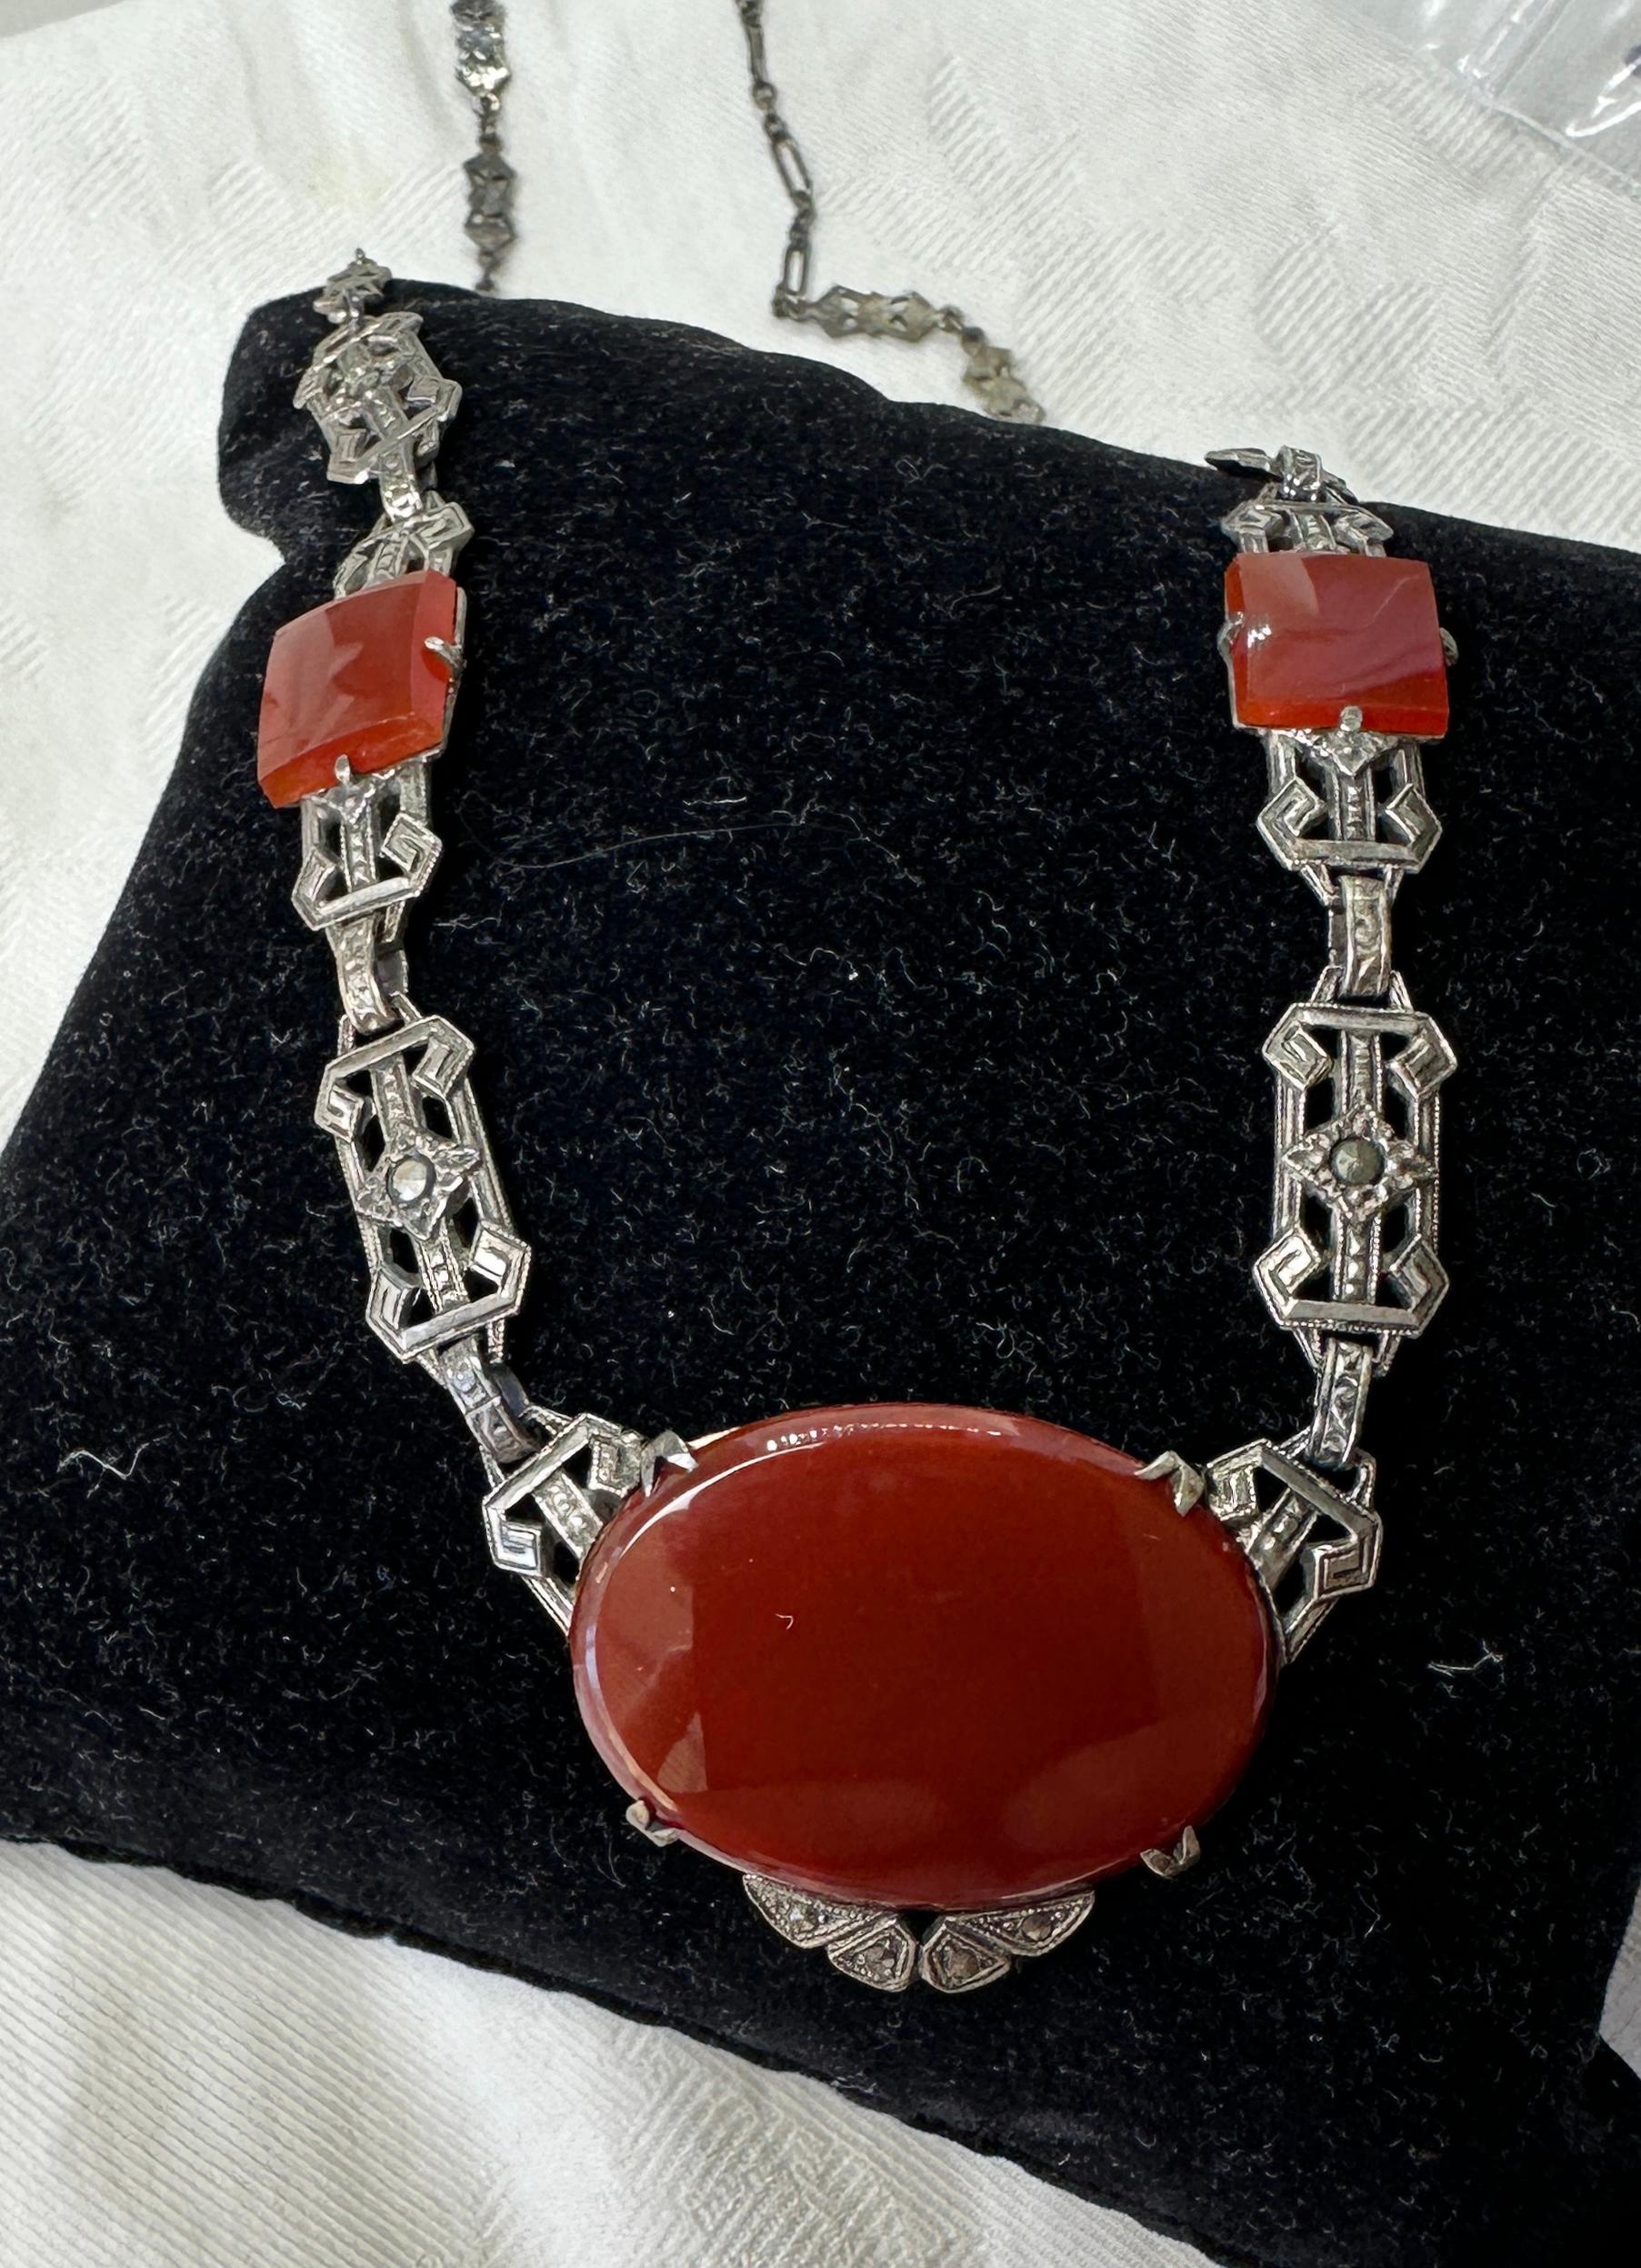 THIS IS A STUNNING ORIGINAL ART DECO CARNELIAN MARCASITE NECKLACE OF THE FINEST QUALITY.  THE NECKLACE IS SET WITH THREE OVAL AND SQUARE CUT GORGEOUS VIVID CARNELIAN STONES SET IN STERLING SILVER WITH MARCASITES IN THIS CLASSIC ART DECO JEWEL.  
It